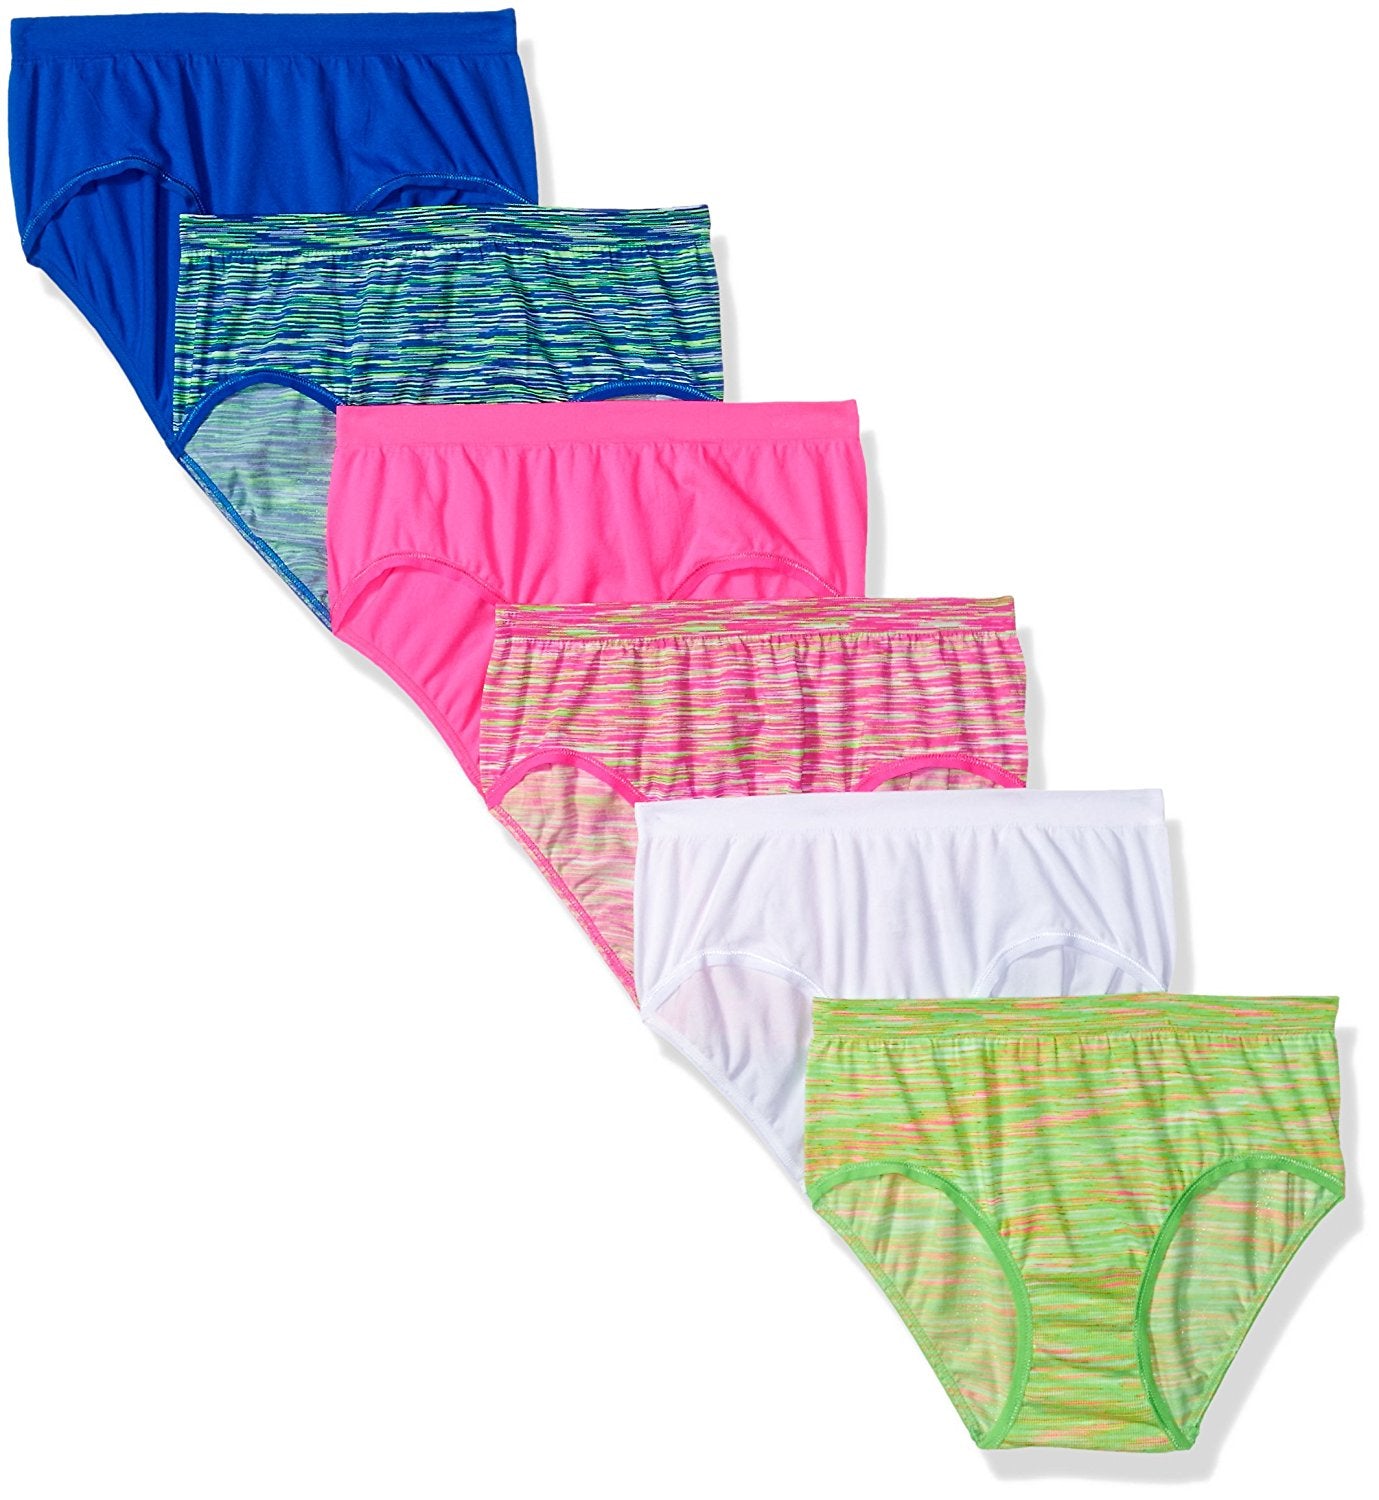 FTL-6GSLBR1 - Fruit of the Loom Girls 6-Pack Seamless Briefs